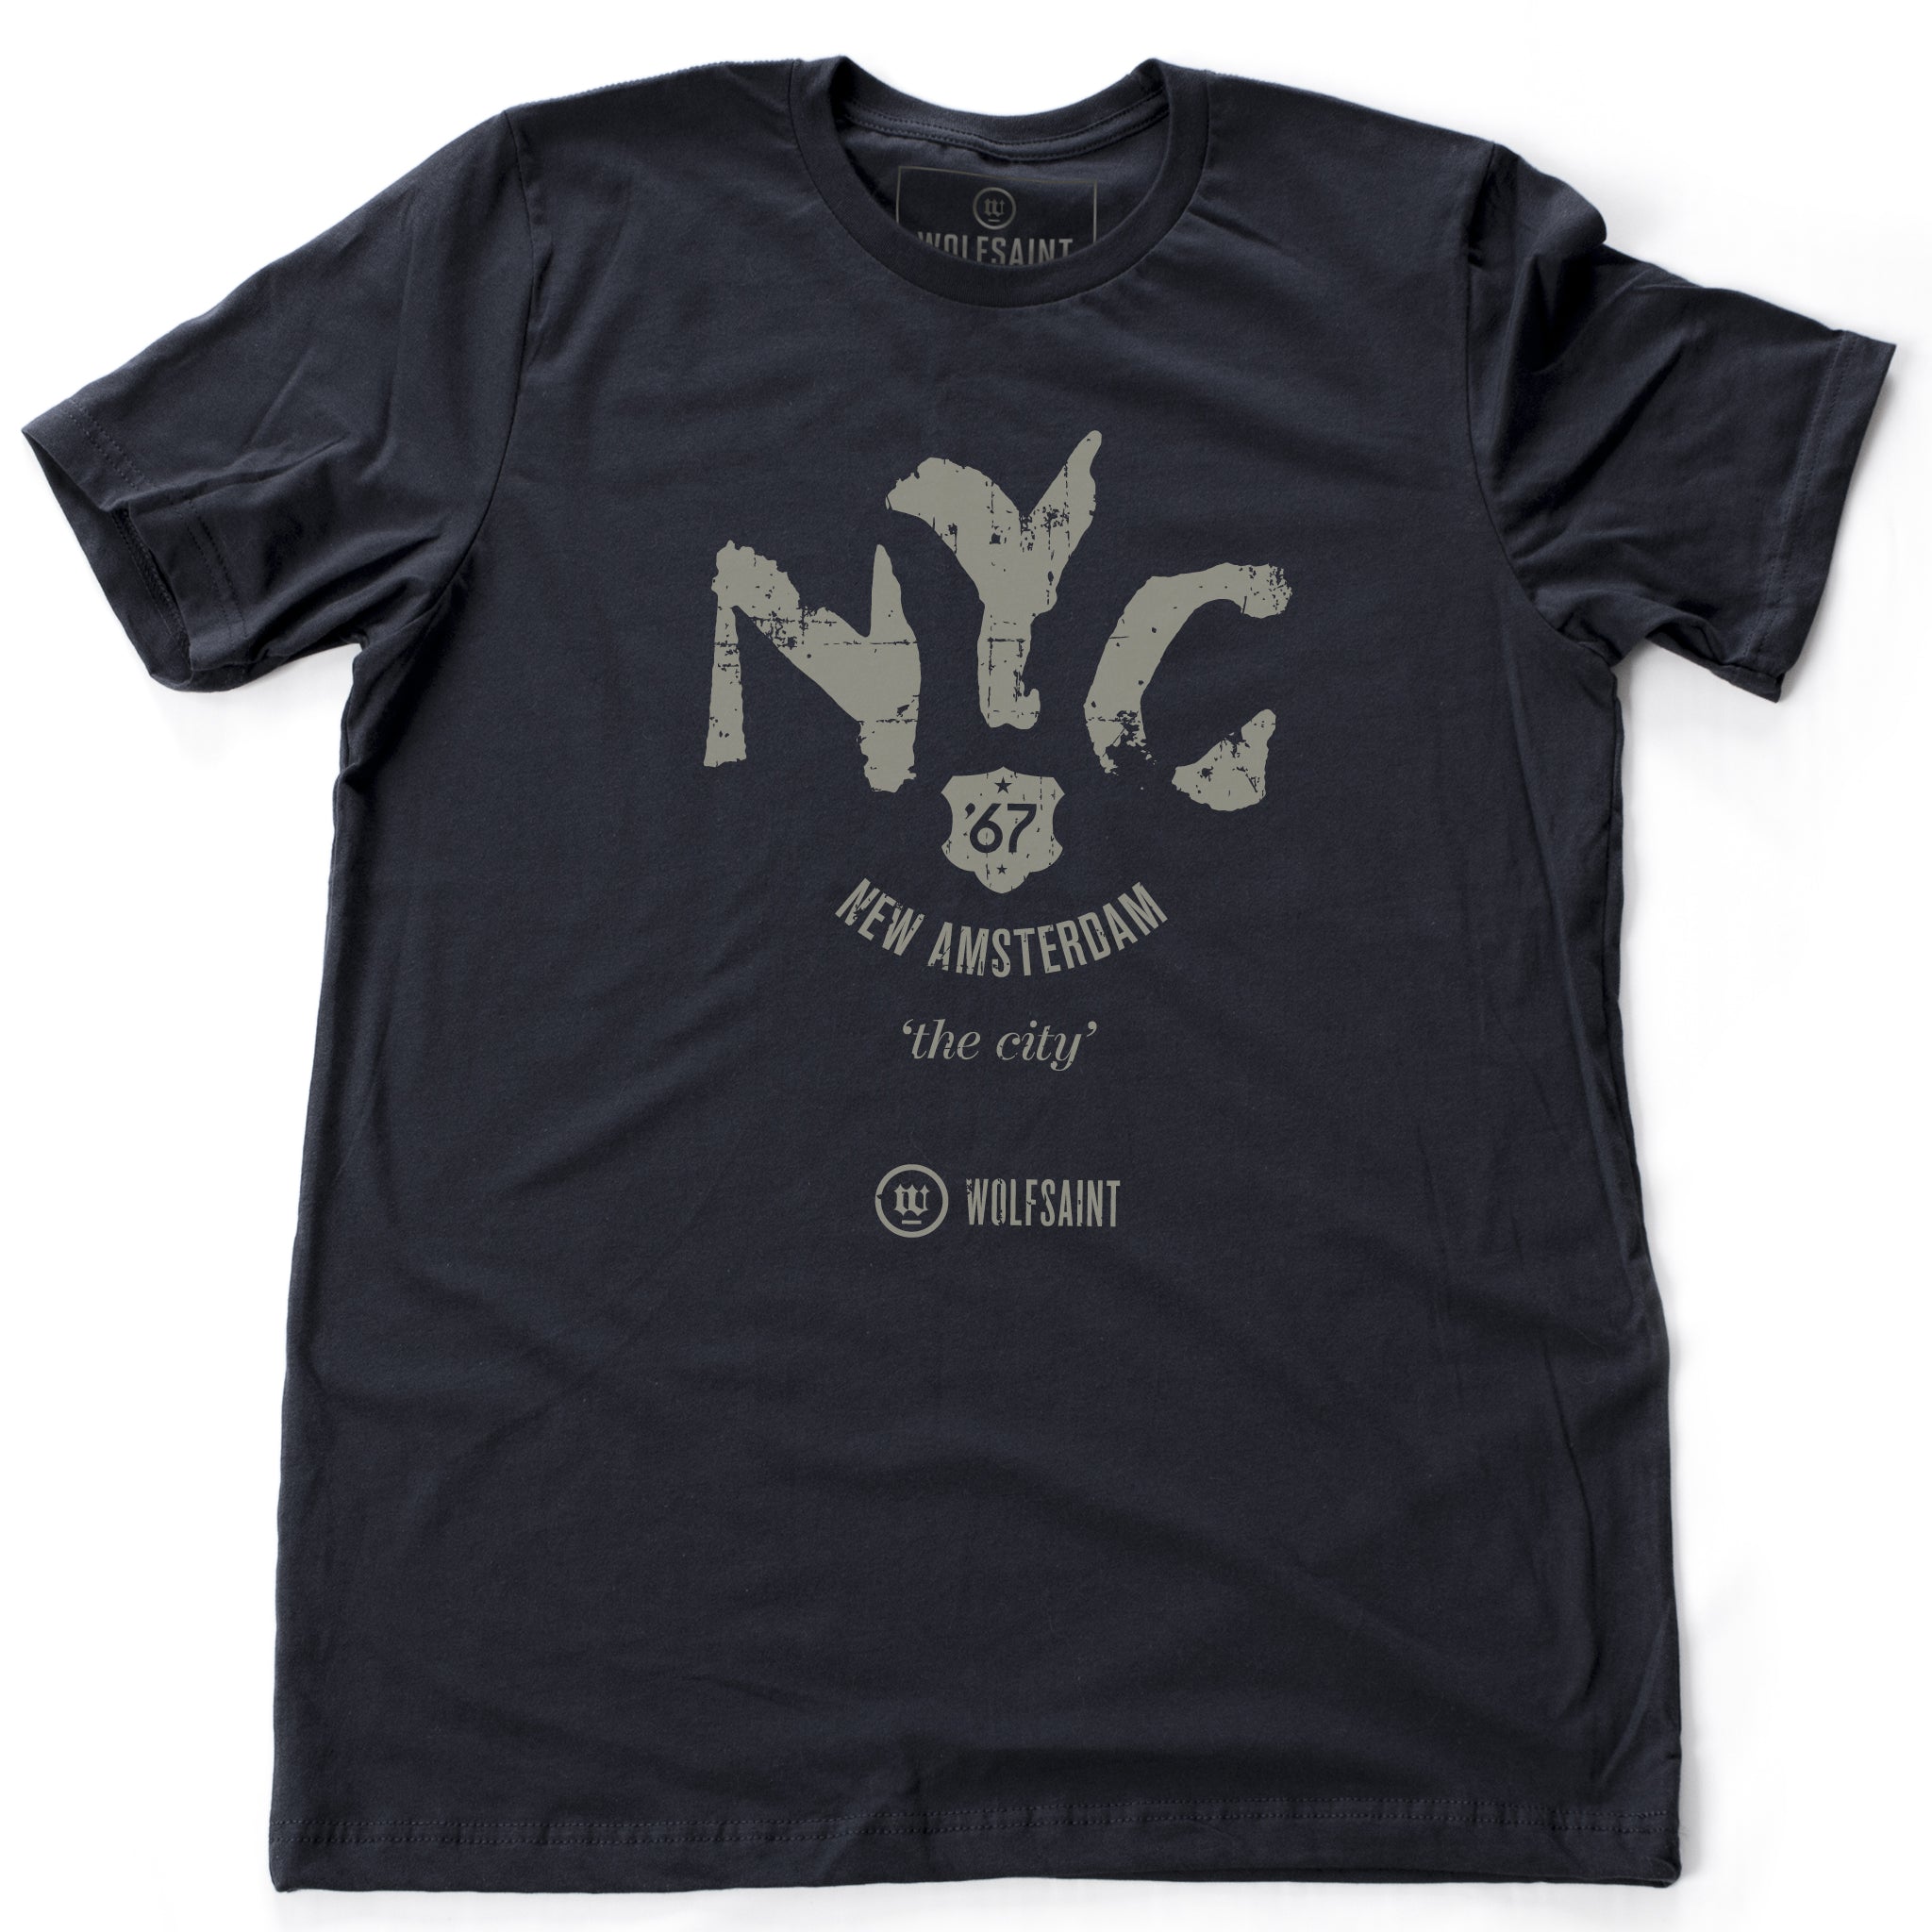 A classic vintage-inspired retro t-shirt in classic Navy Blue, featuring “NYC” in a large ‘painted’ font, with “New Amsterdam” in a small arc below, then “the city” and then the 